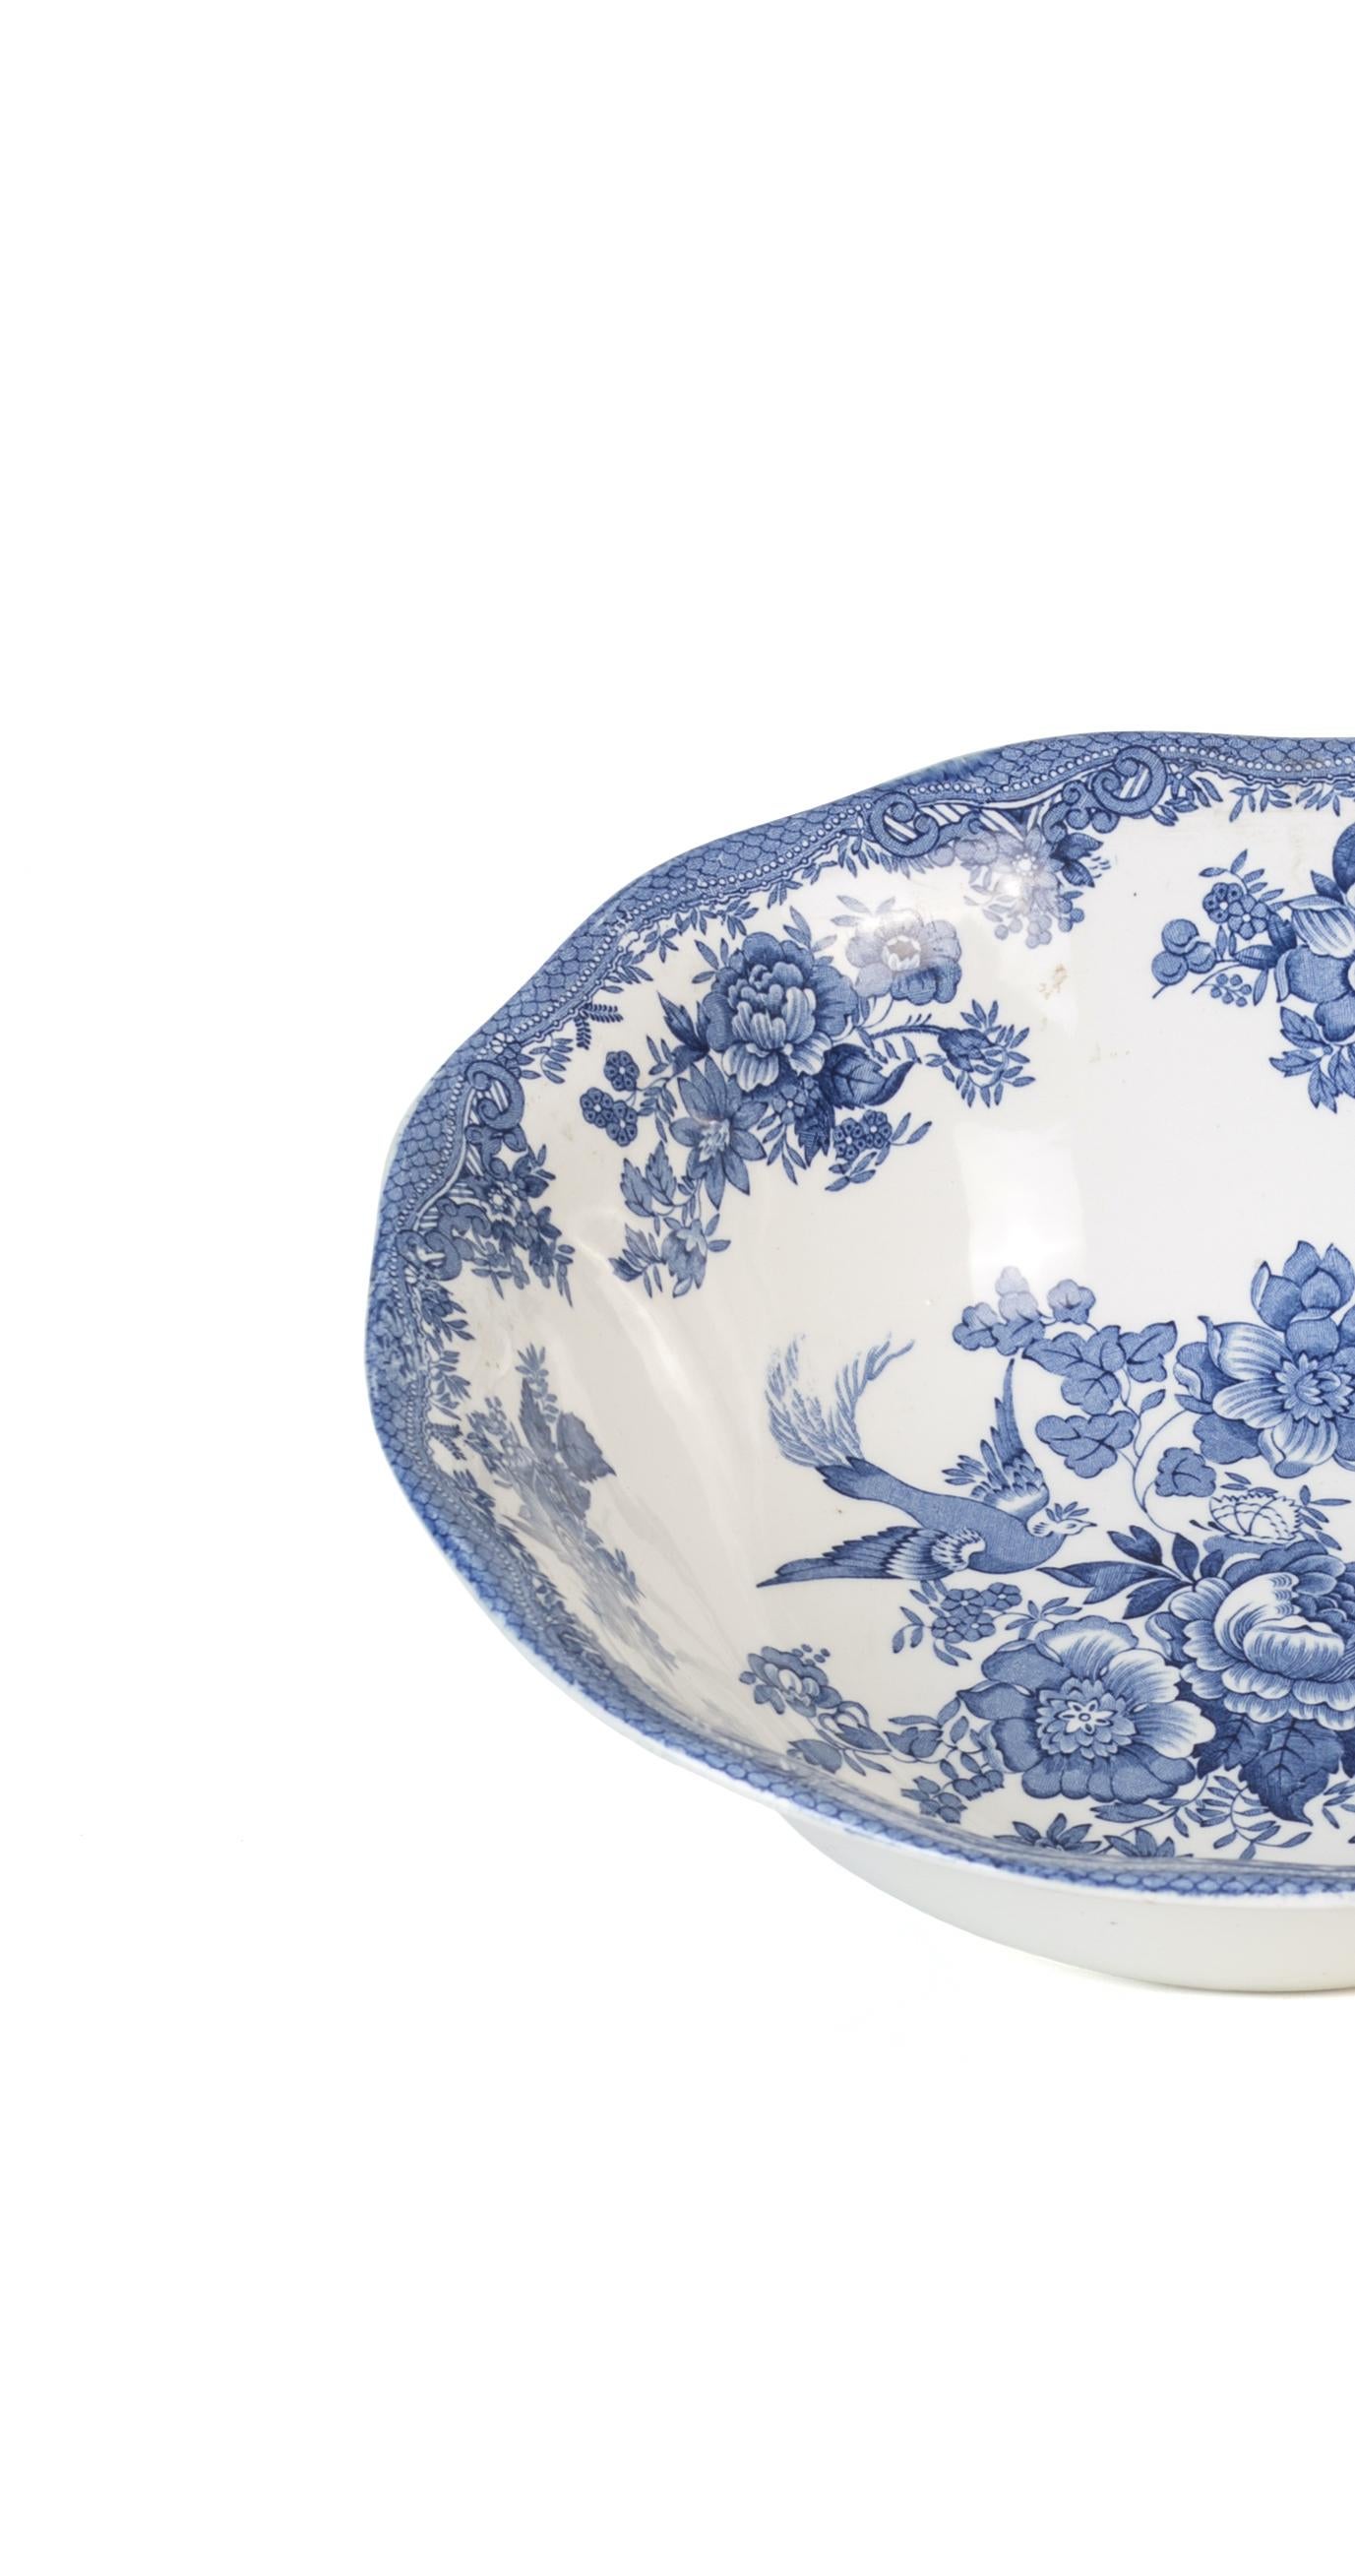 Vintage Enoch Wedgwood bowl is an elegant porcelain decorative object, realized during the 20th century and realized by Wedgwood and Co.

This very elegant salad bowl is decorated with the typical garnish of the manufacture Wedgwood, blue and